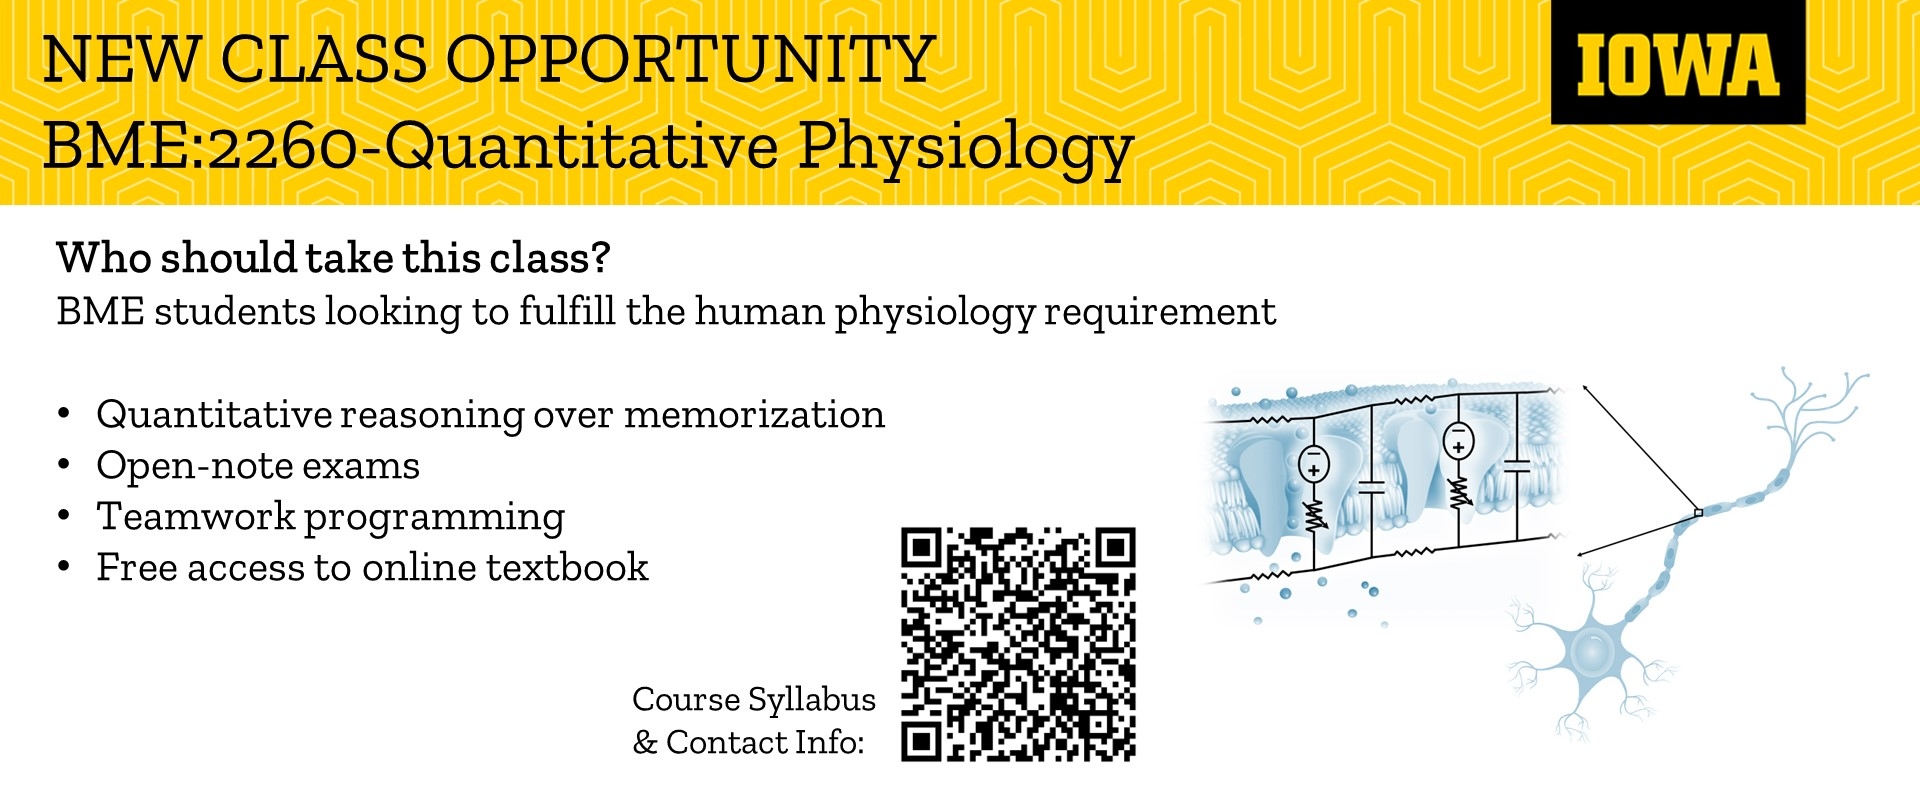 New Class Opportunity: BME:2260 Quantitative Physiology